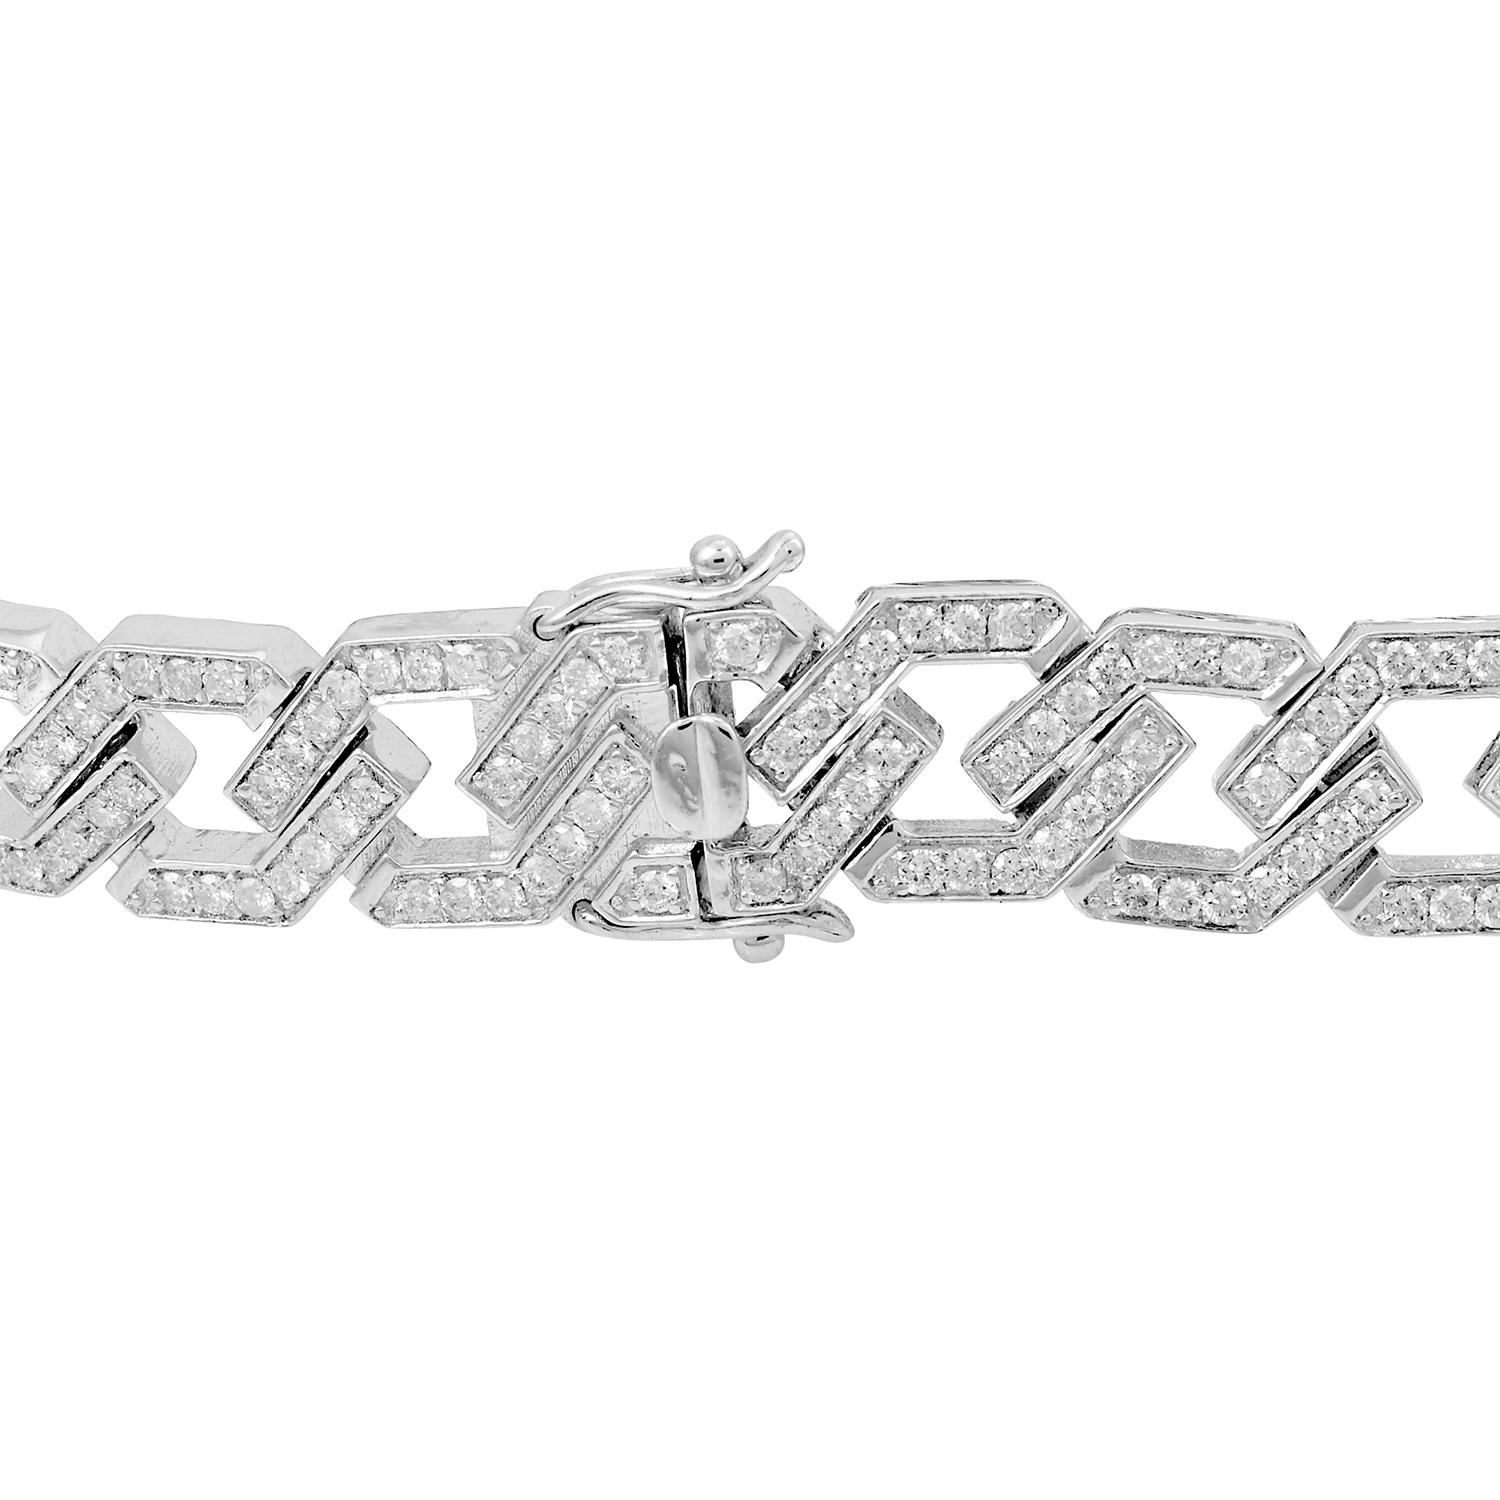 Item Code :- CN-25593
Gross Wt. :- 21.01 gm
18k White Gold Wt. :- 20.39 gm
Diamond Wt. :- 3.10 Ct. ( AVERAGE DIAMOND CLARITY SI1-SI2 & COLOR H-I )
Bracelet Size :- 7 Inch
✦ Sizing
.....................
We can adjust most items to fit your sizing